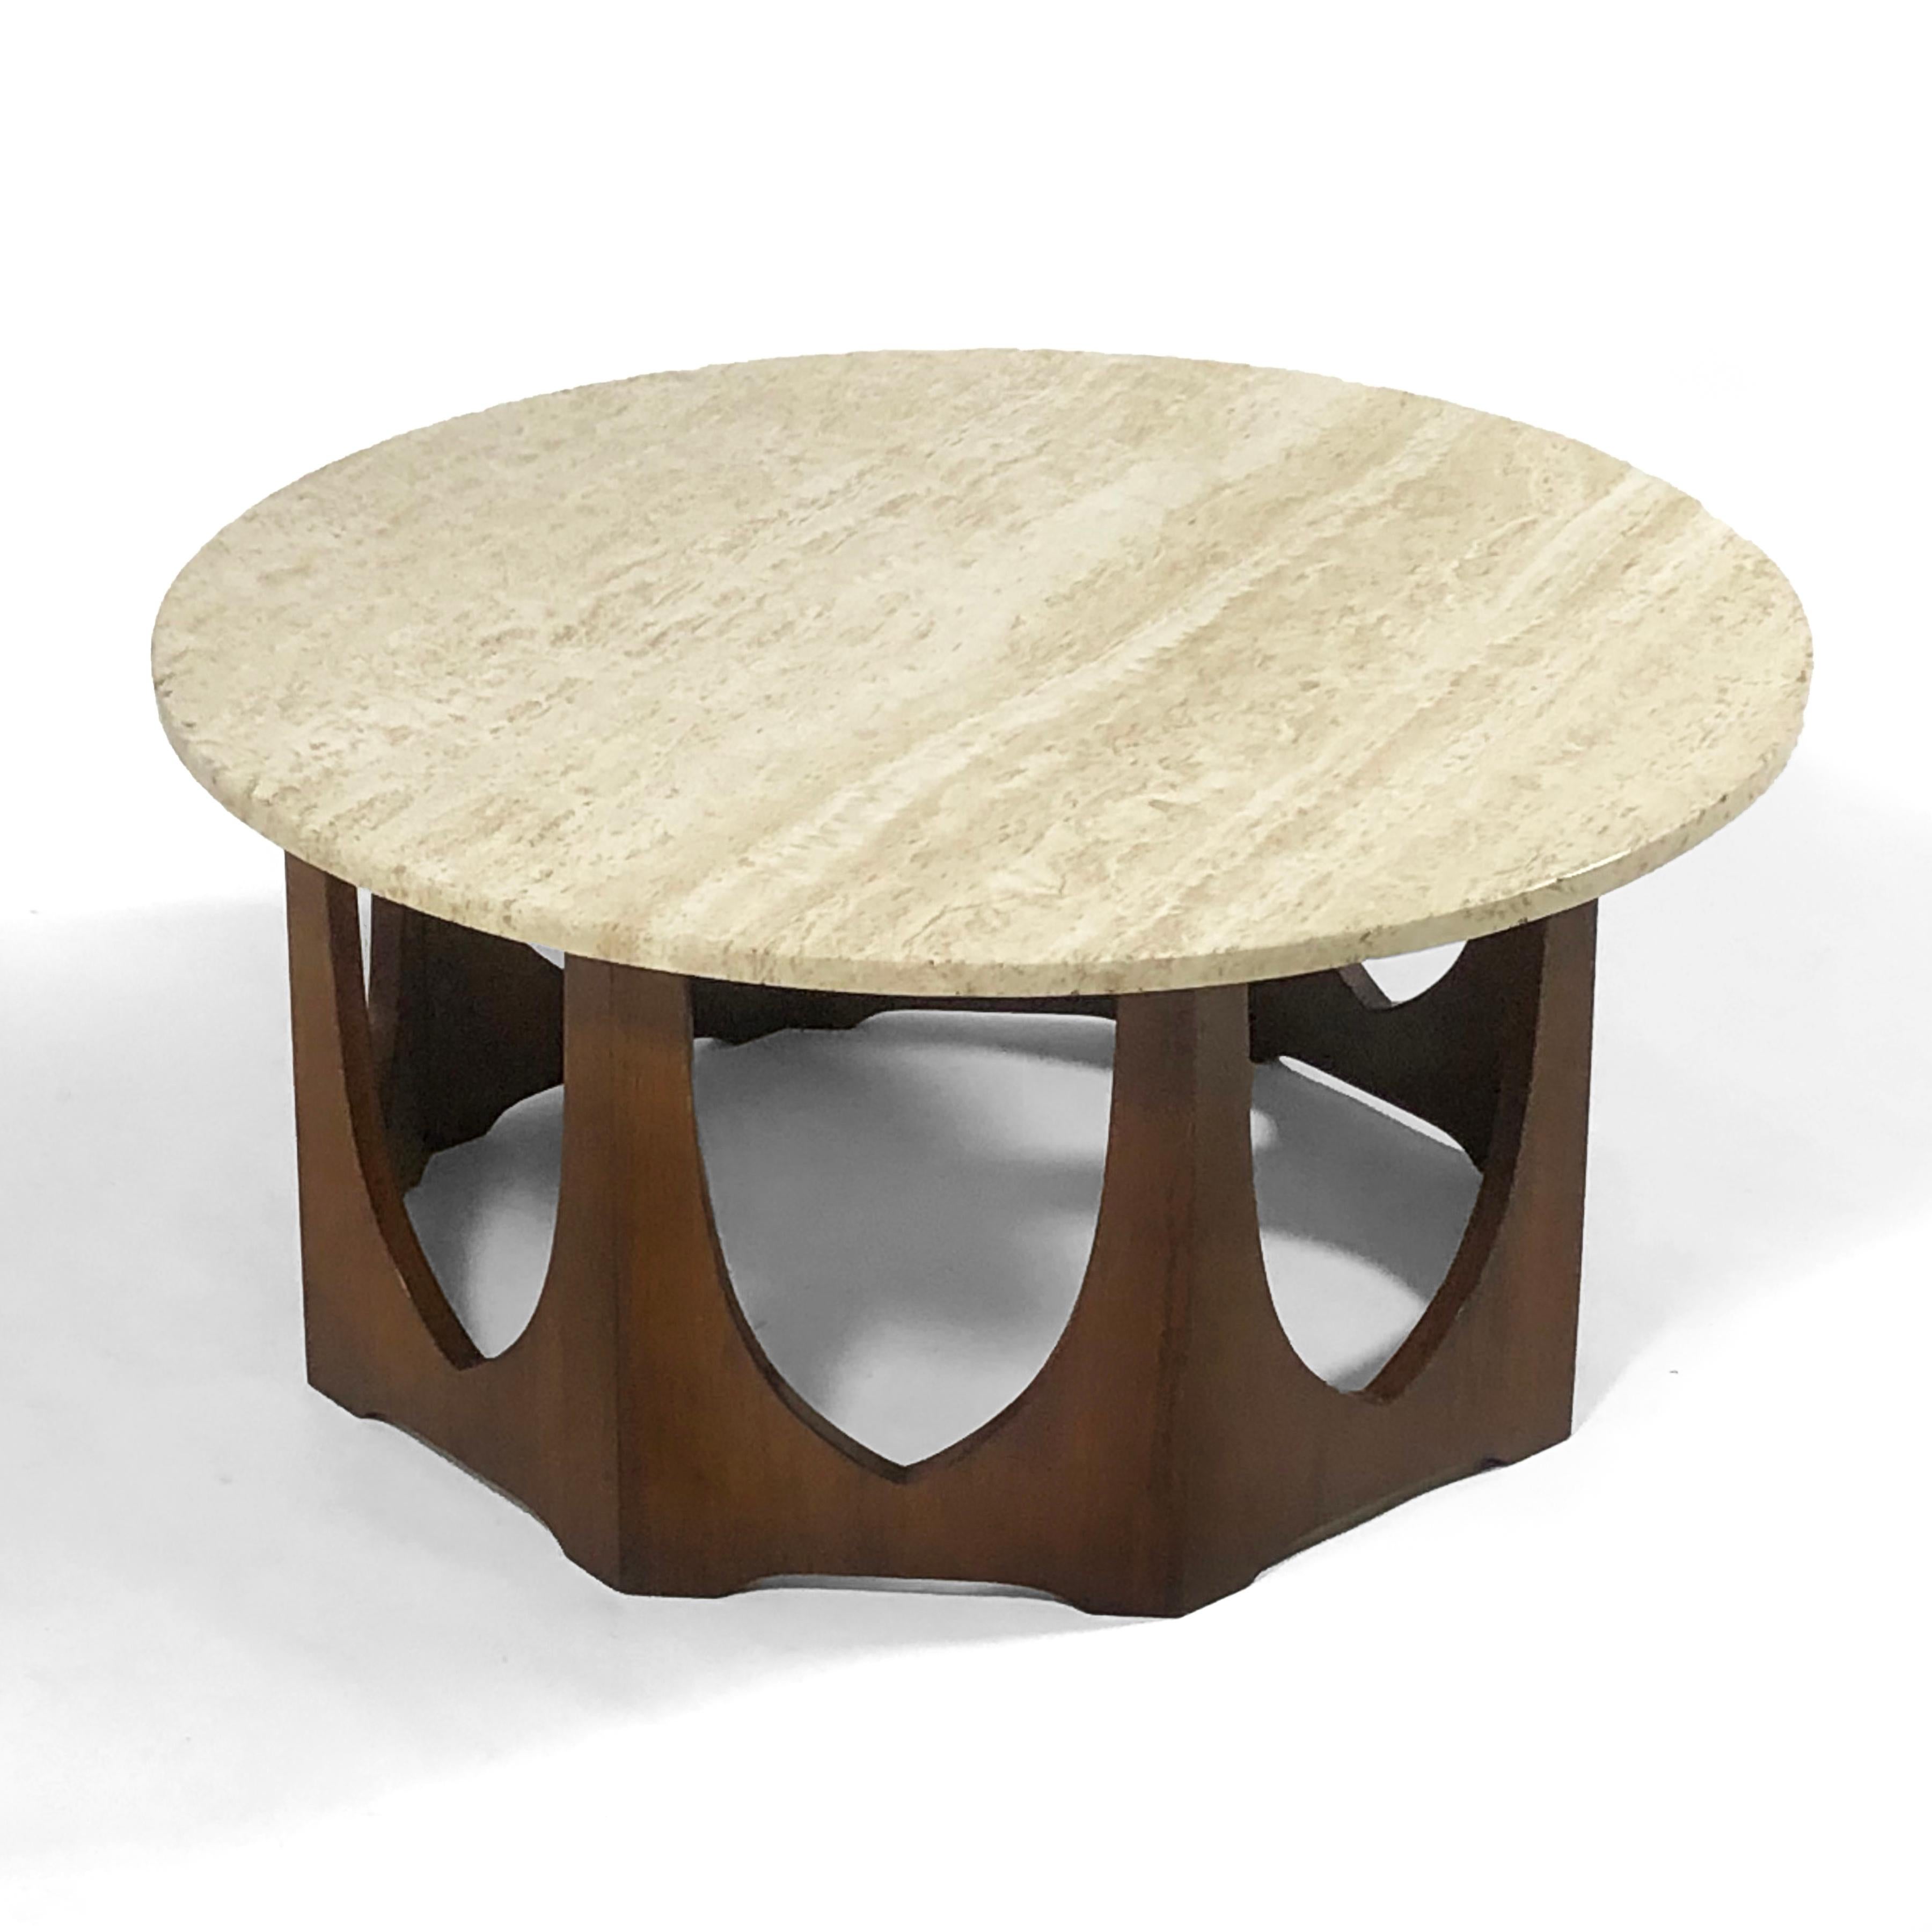 This handsome cocktail table by Harvey Probber has a mahogany base and travertine top. The warm palate and natural materials are a pleasing compliment to any interior.